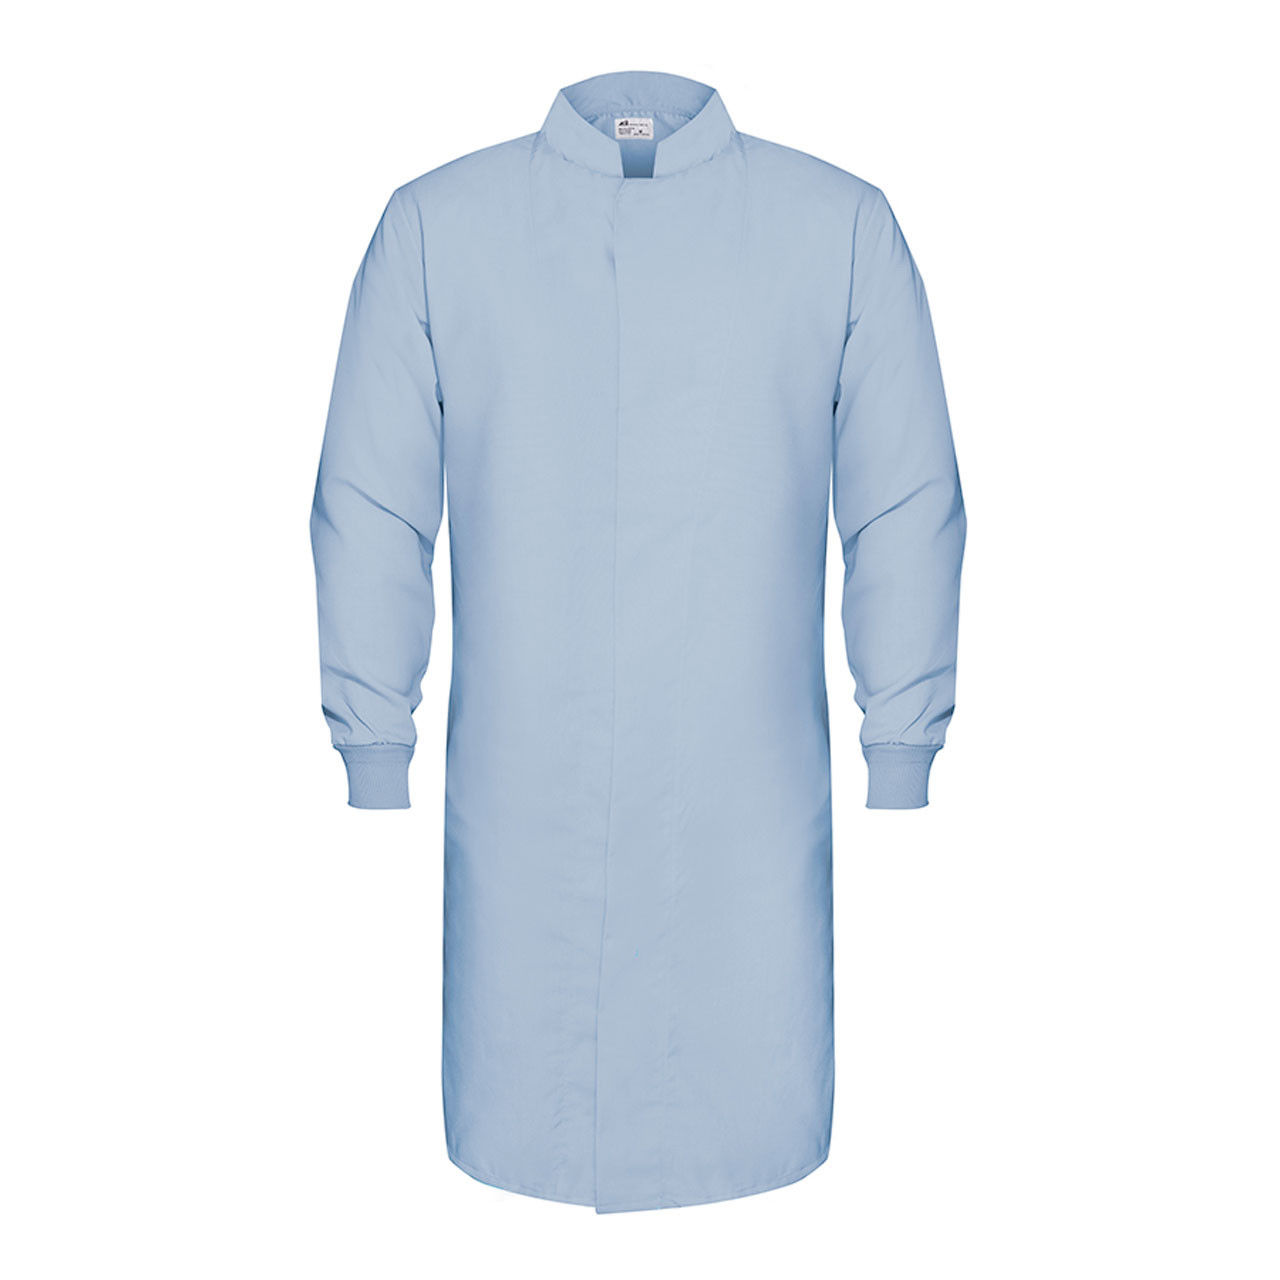 What sizes are available for this lab coat?